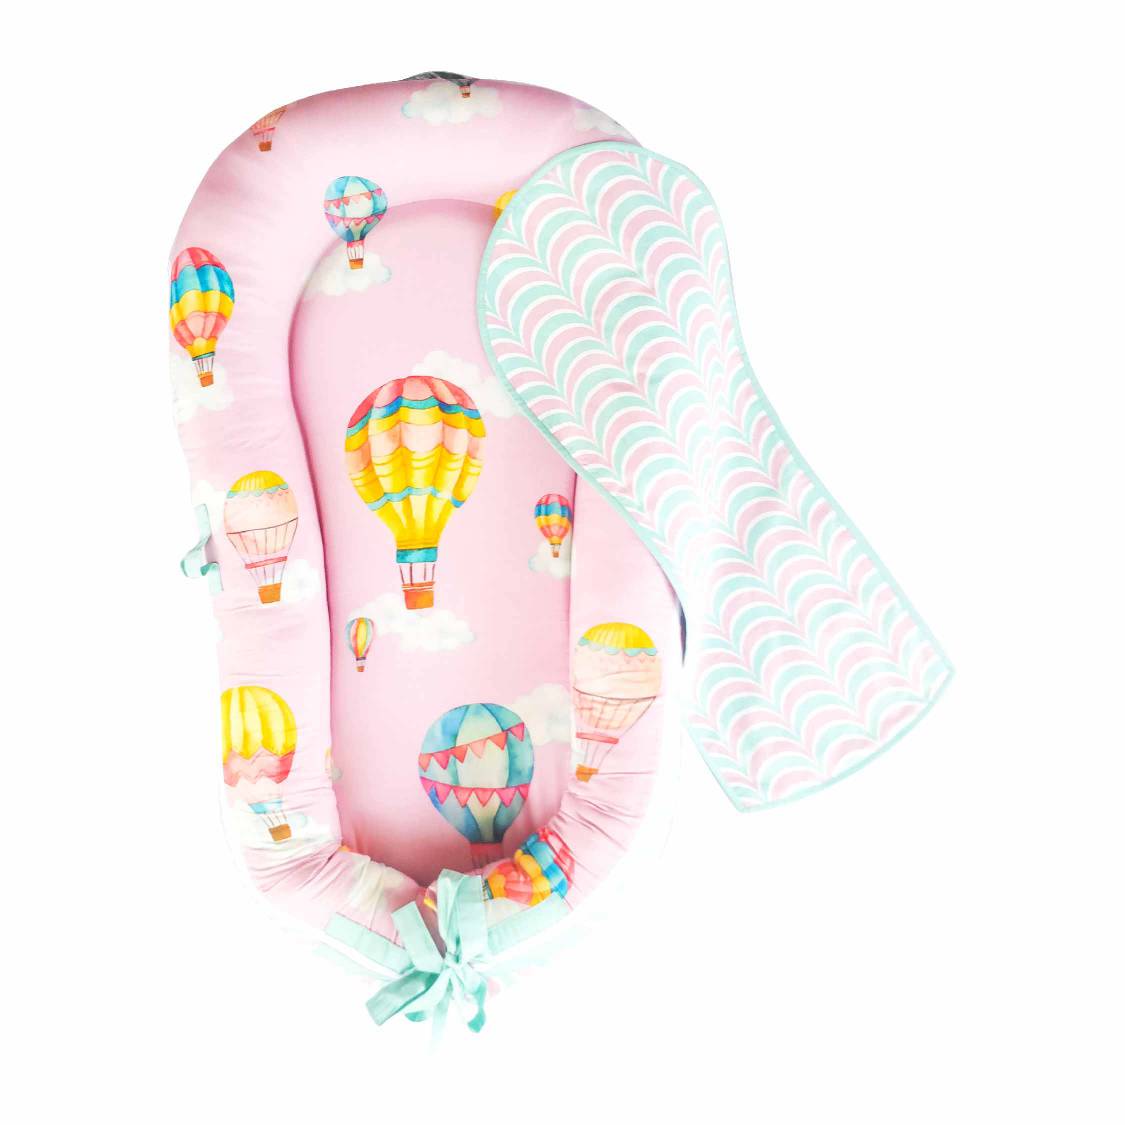 Cappadocia Hot Air Balloon - Snuggly Nest With Attachments - Blush Pink